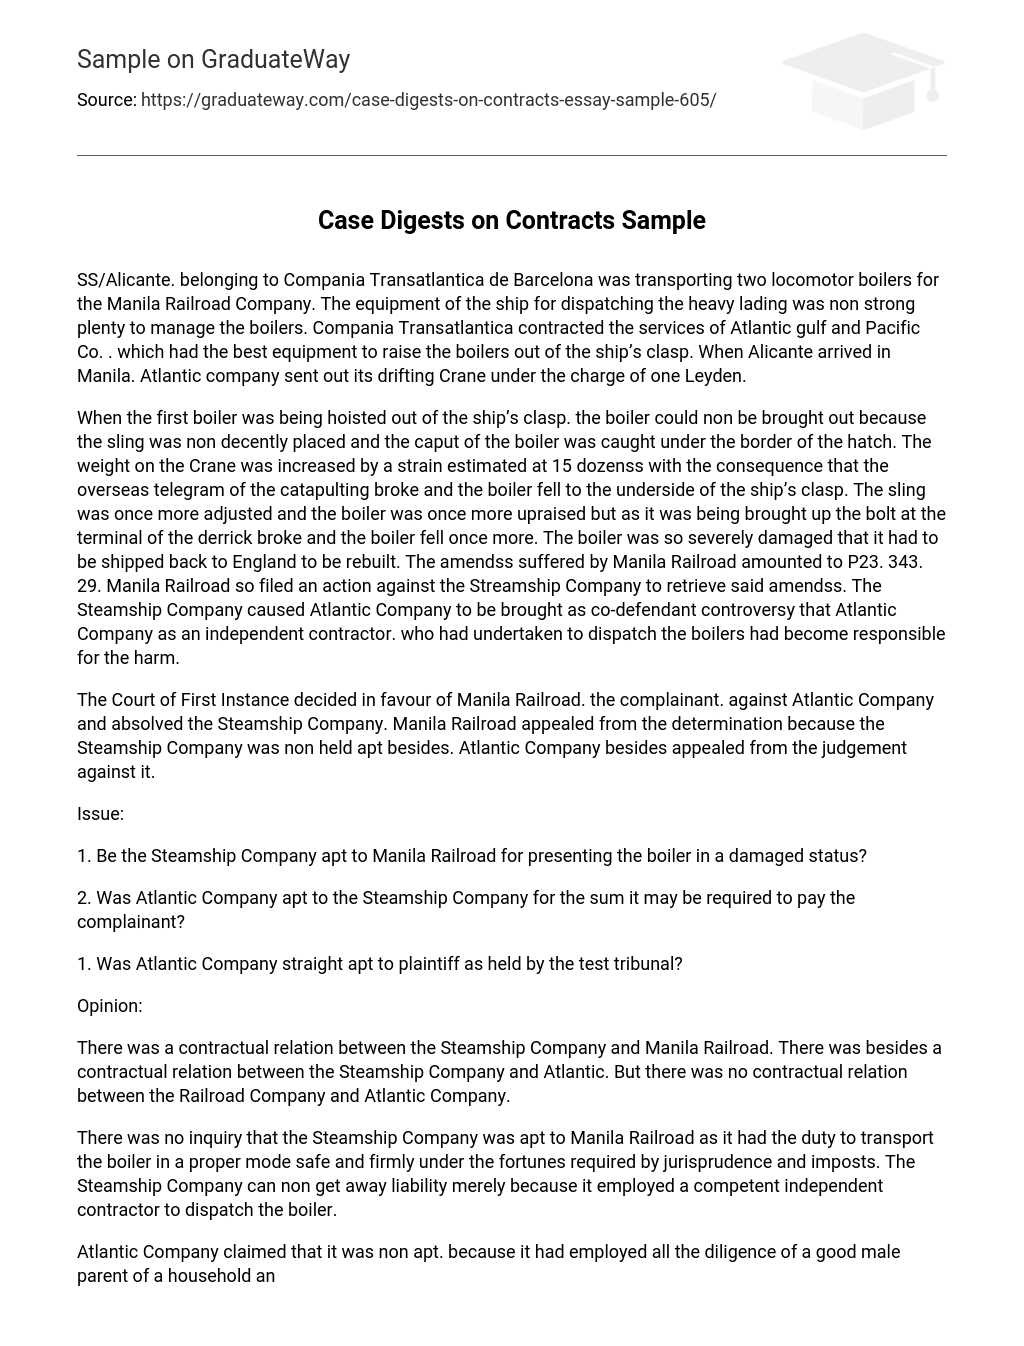 Case Digests on Contracts Sample